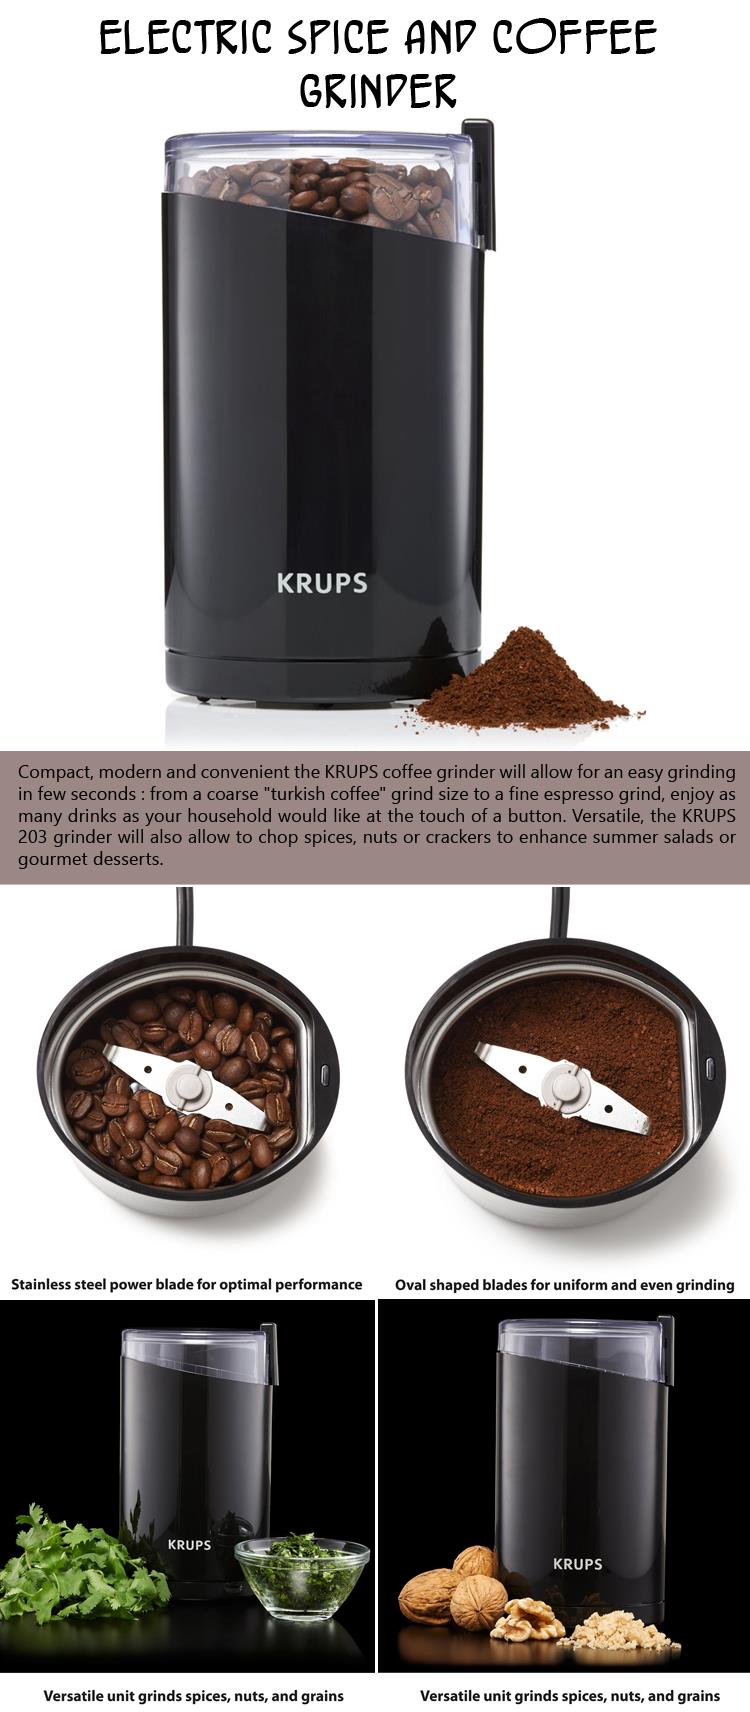 electric-spice-and-coffee-grinder